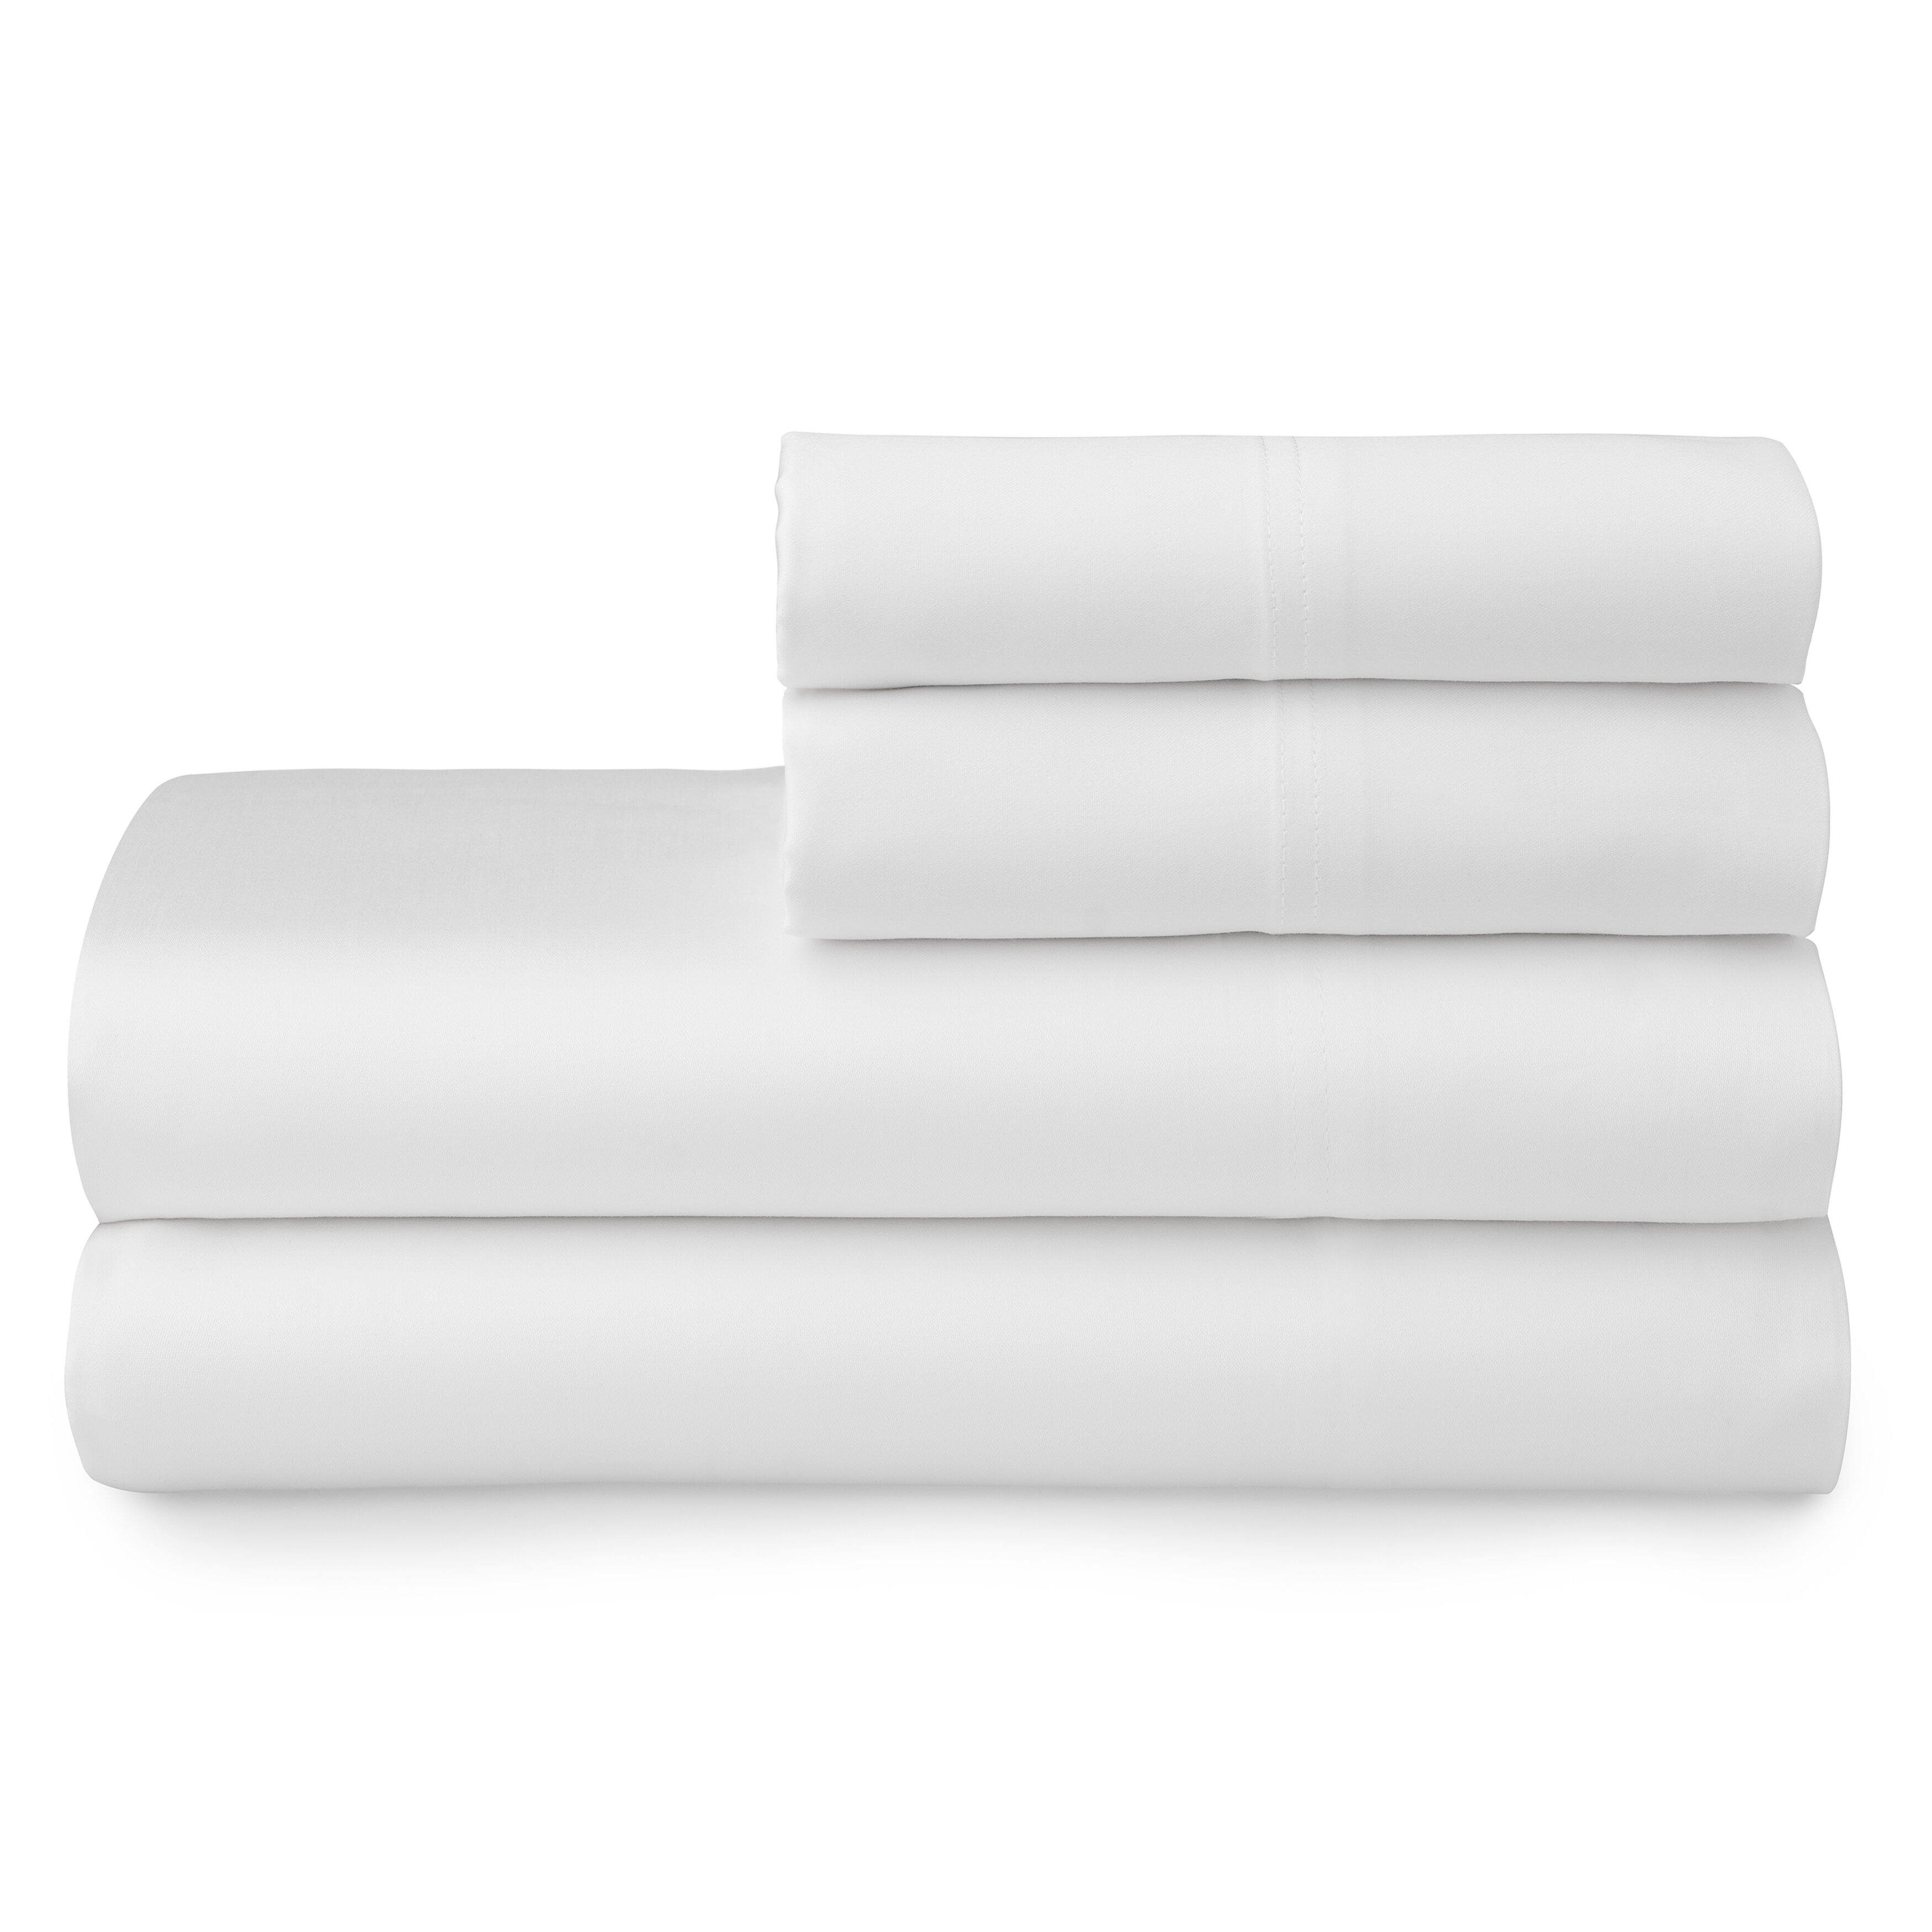 FITTED SHEETS LUXURY100% EGYPTIAN COTTON 250 THREAD COUNT SHEETS ALL SIZES 